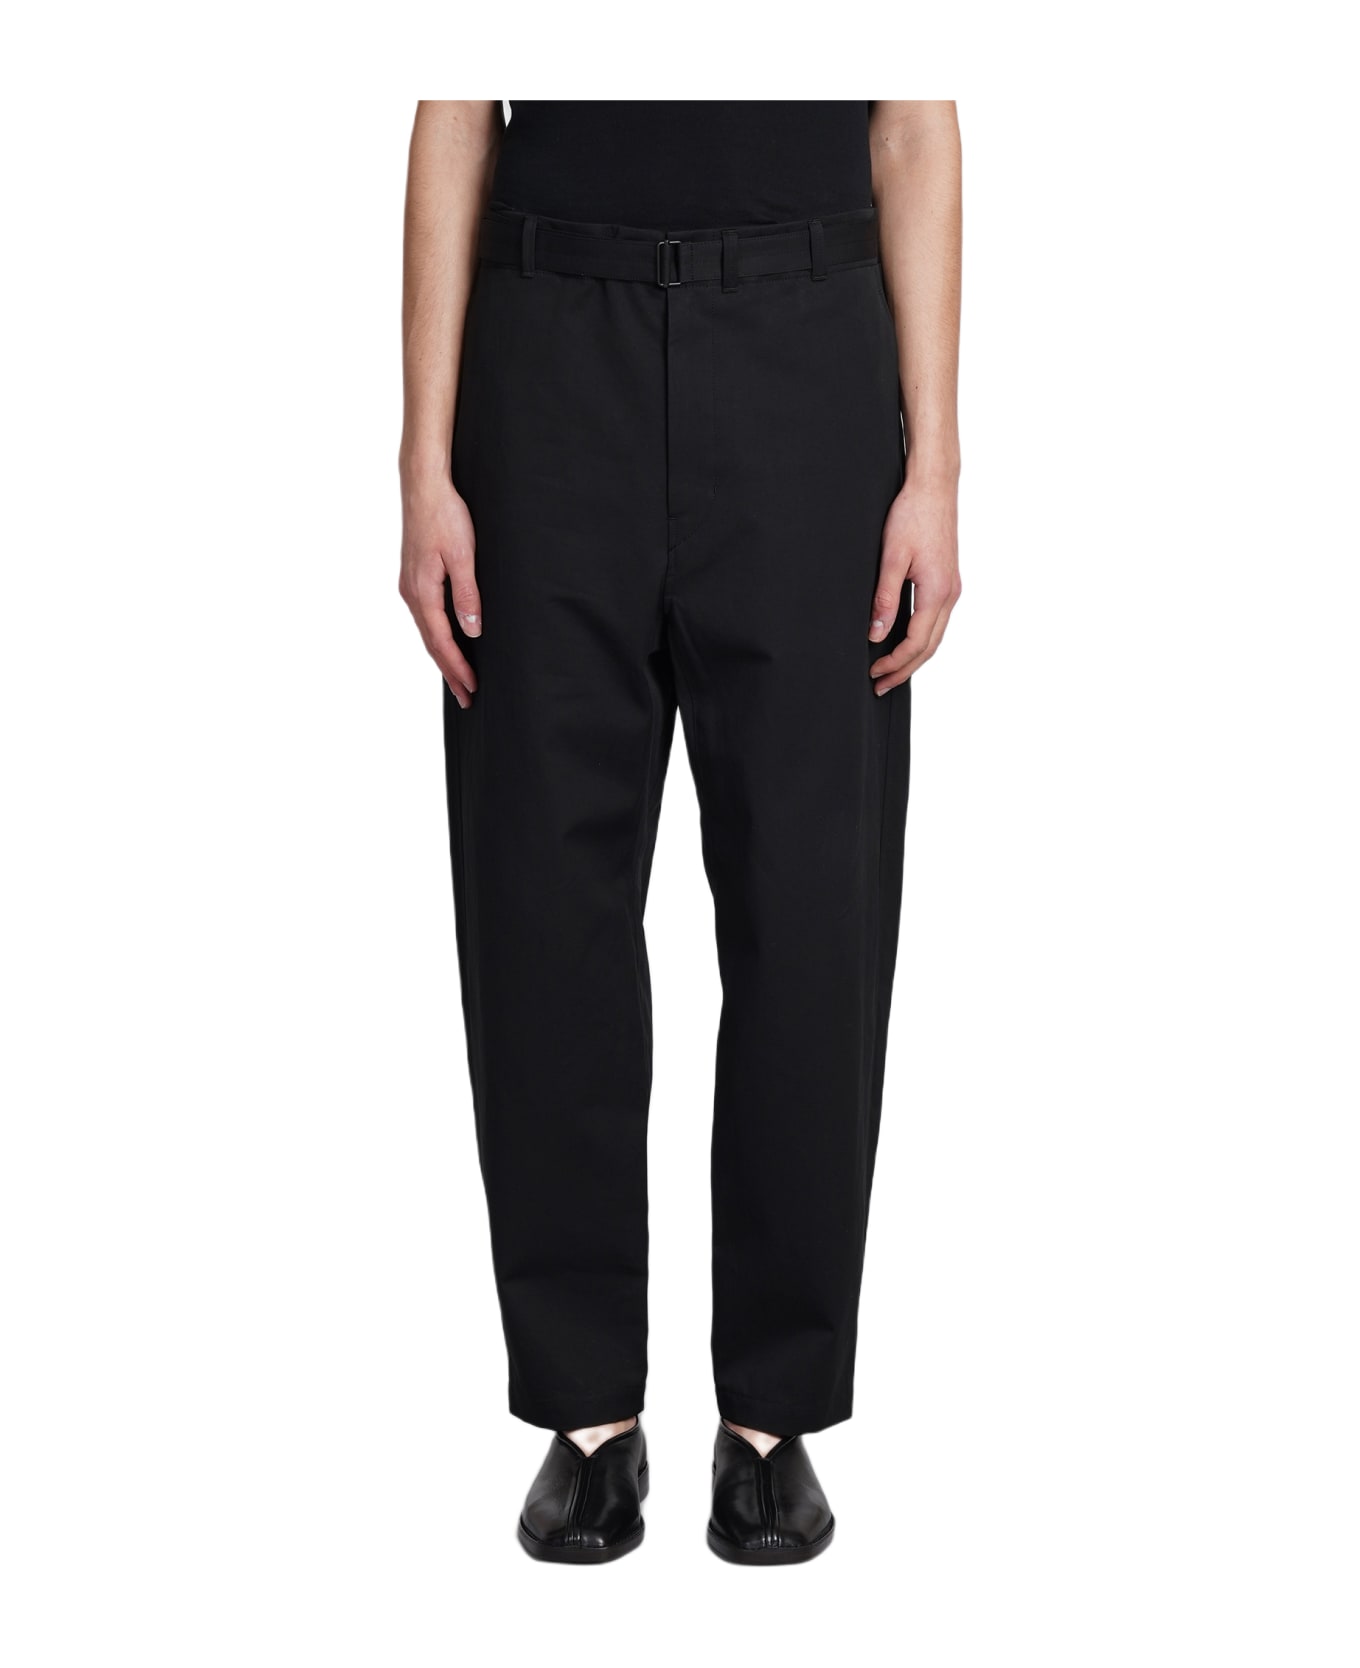 Lemaire Pants In Black Cotton - black ボトムス